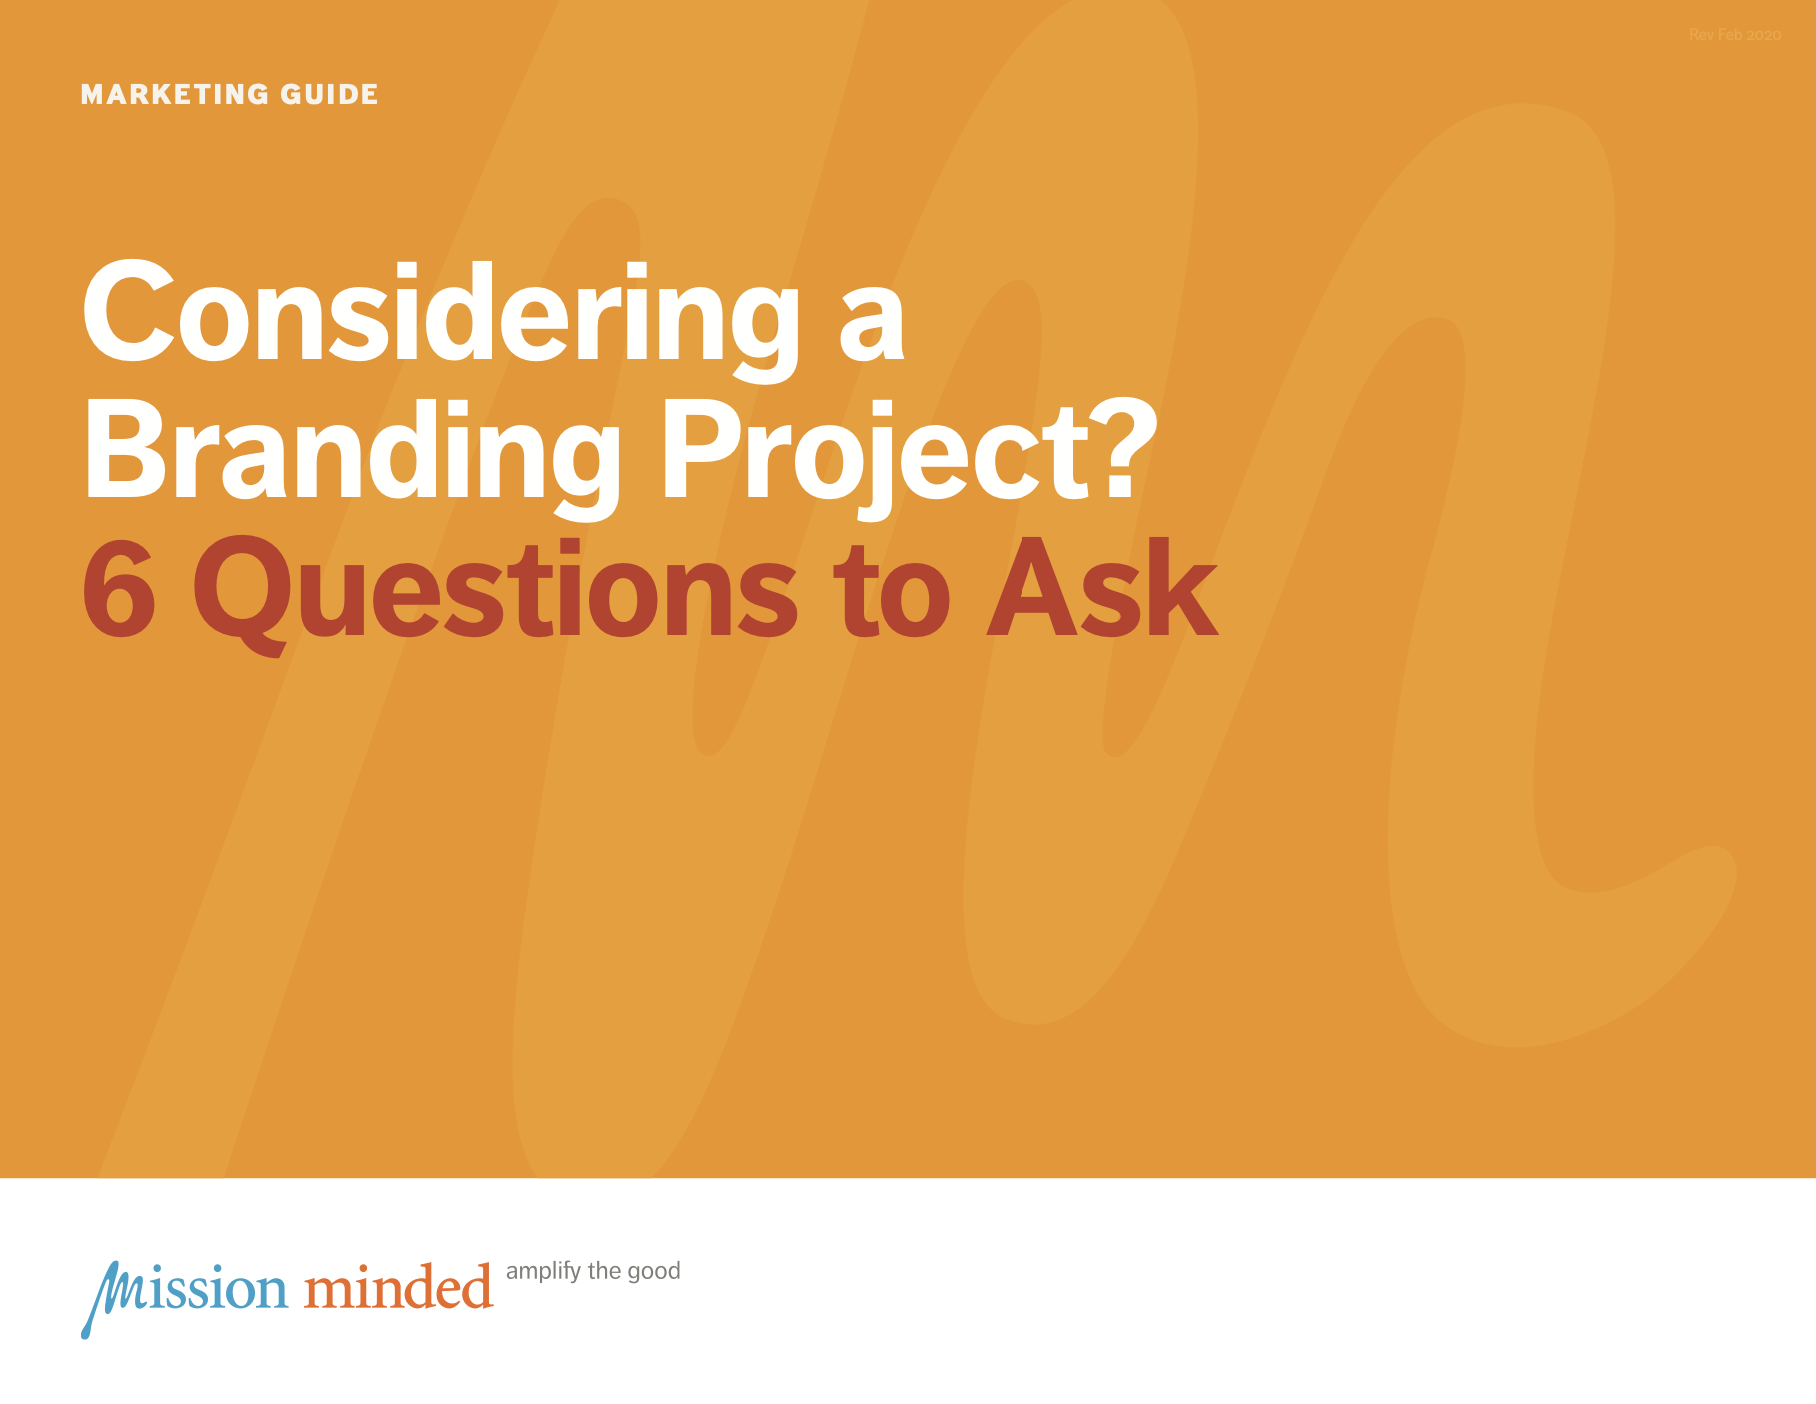 Considering a Branding Project? | 6 Key Questions to Ask